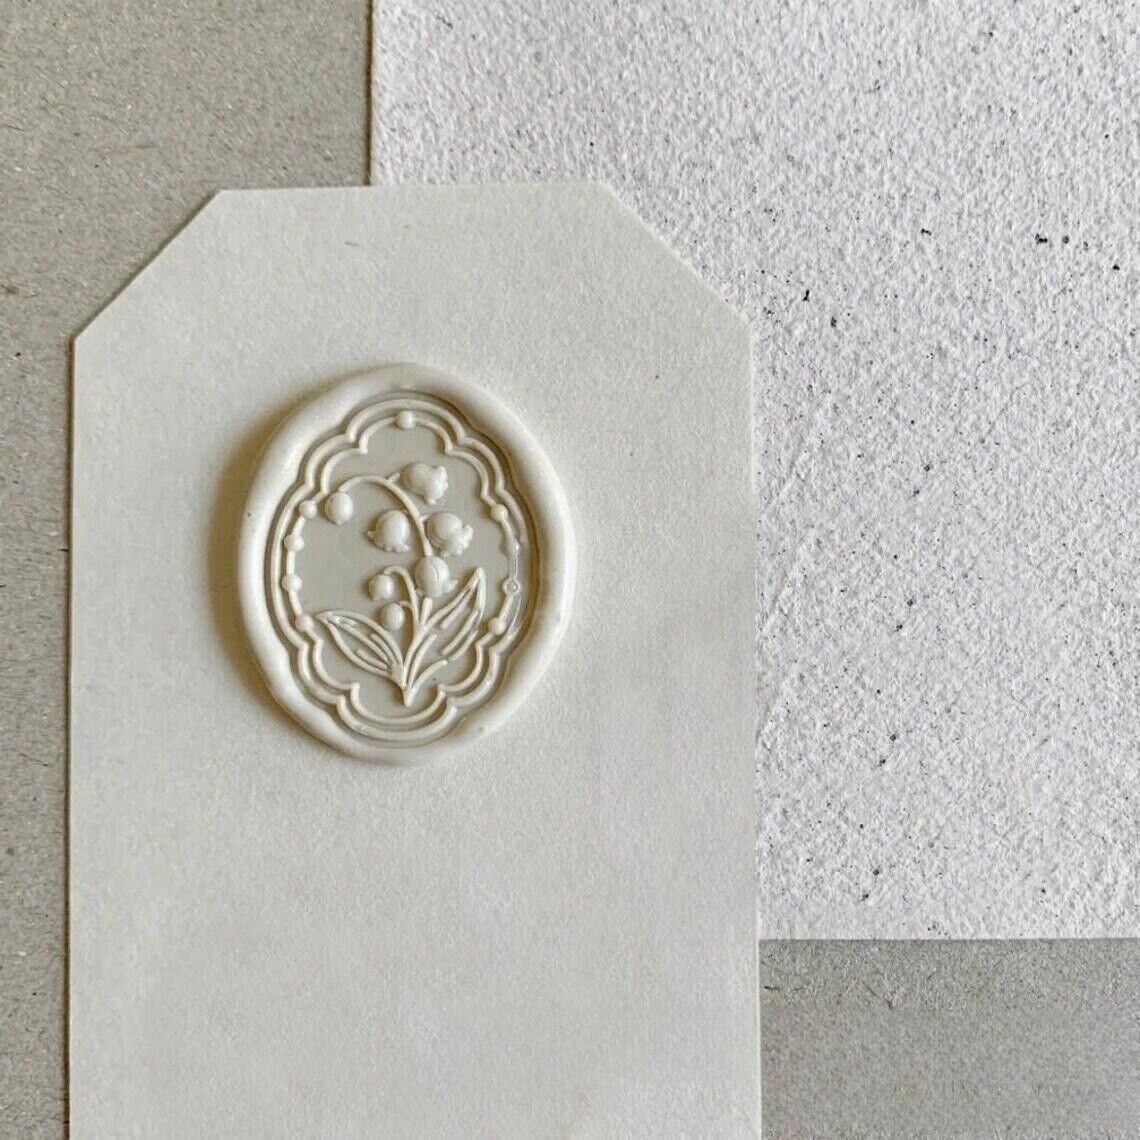 3D Wax Seal Stamp - 1pcs 3D Lily of the Valley Metal Sealing Wax Stamp